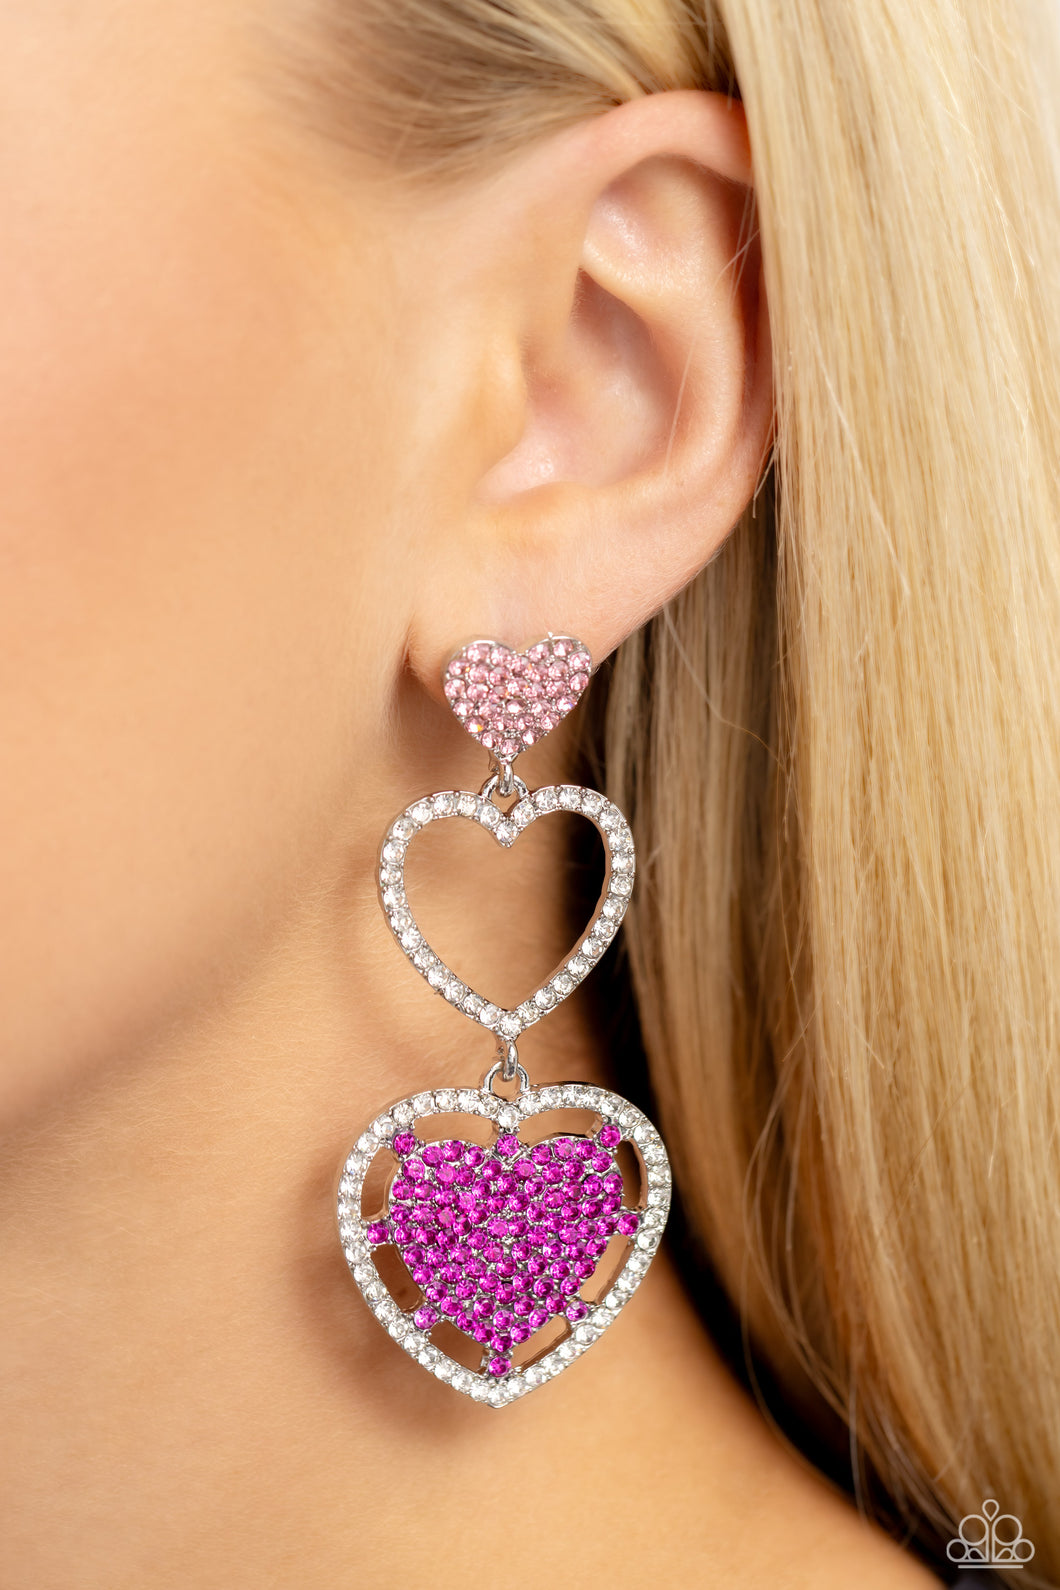 Paparazzi Accessories: Couples Celebration - Pink Heart Earrings